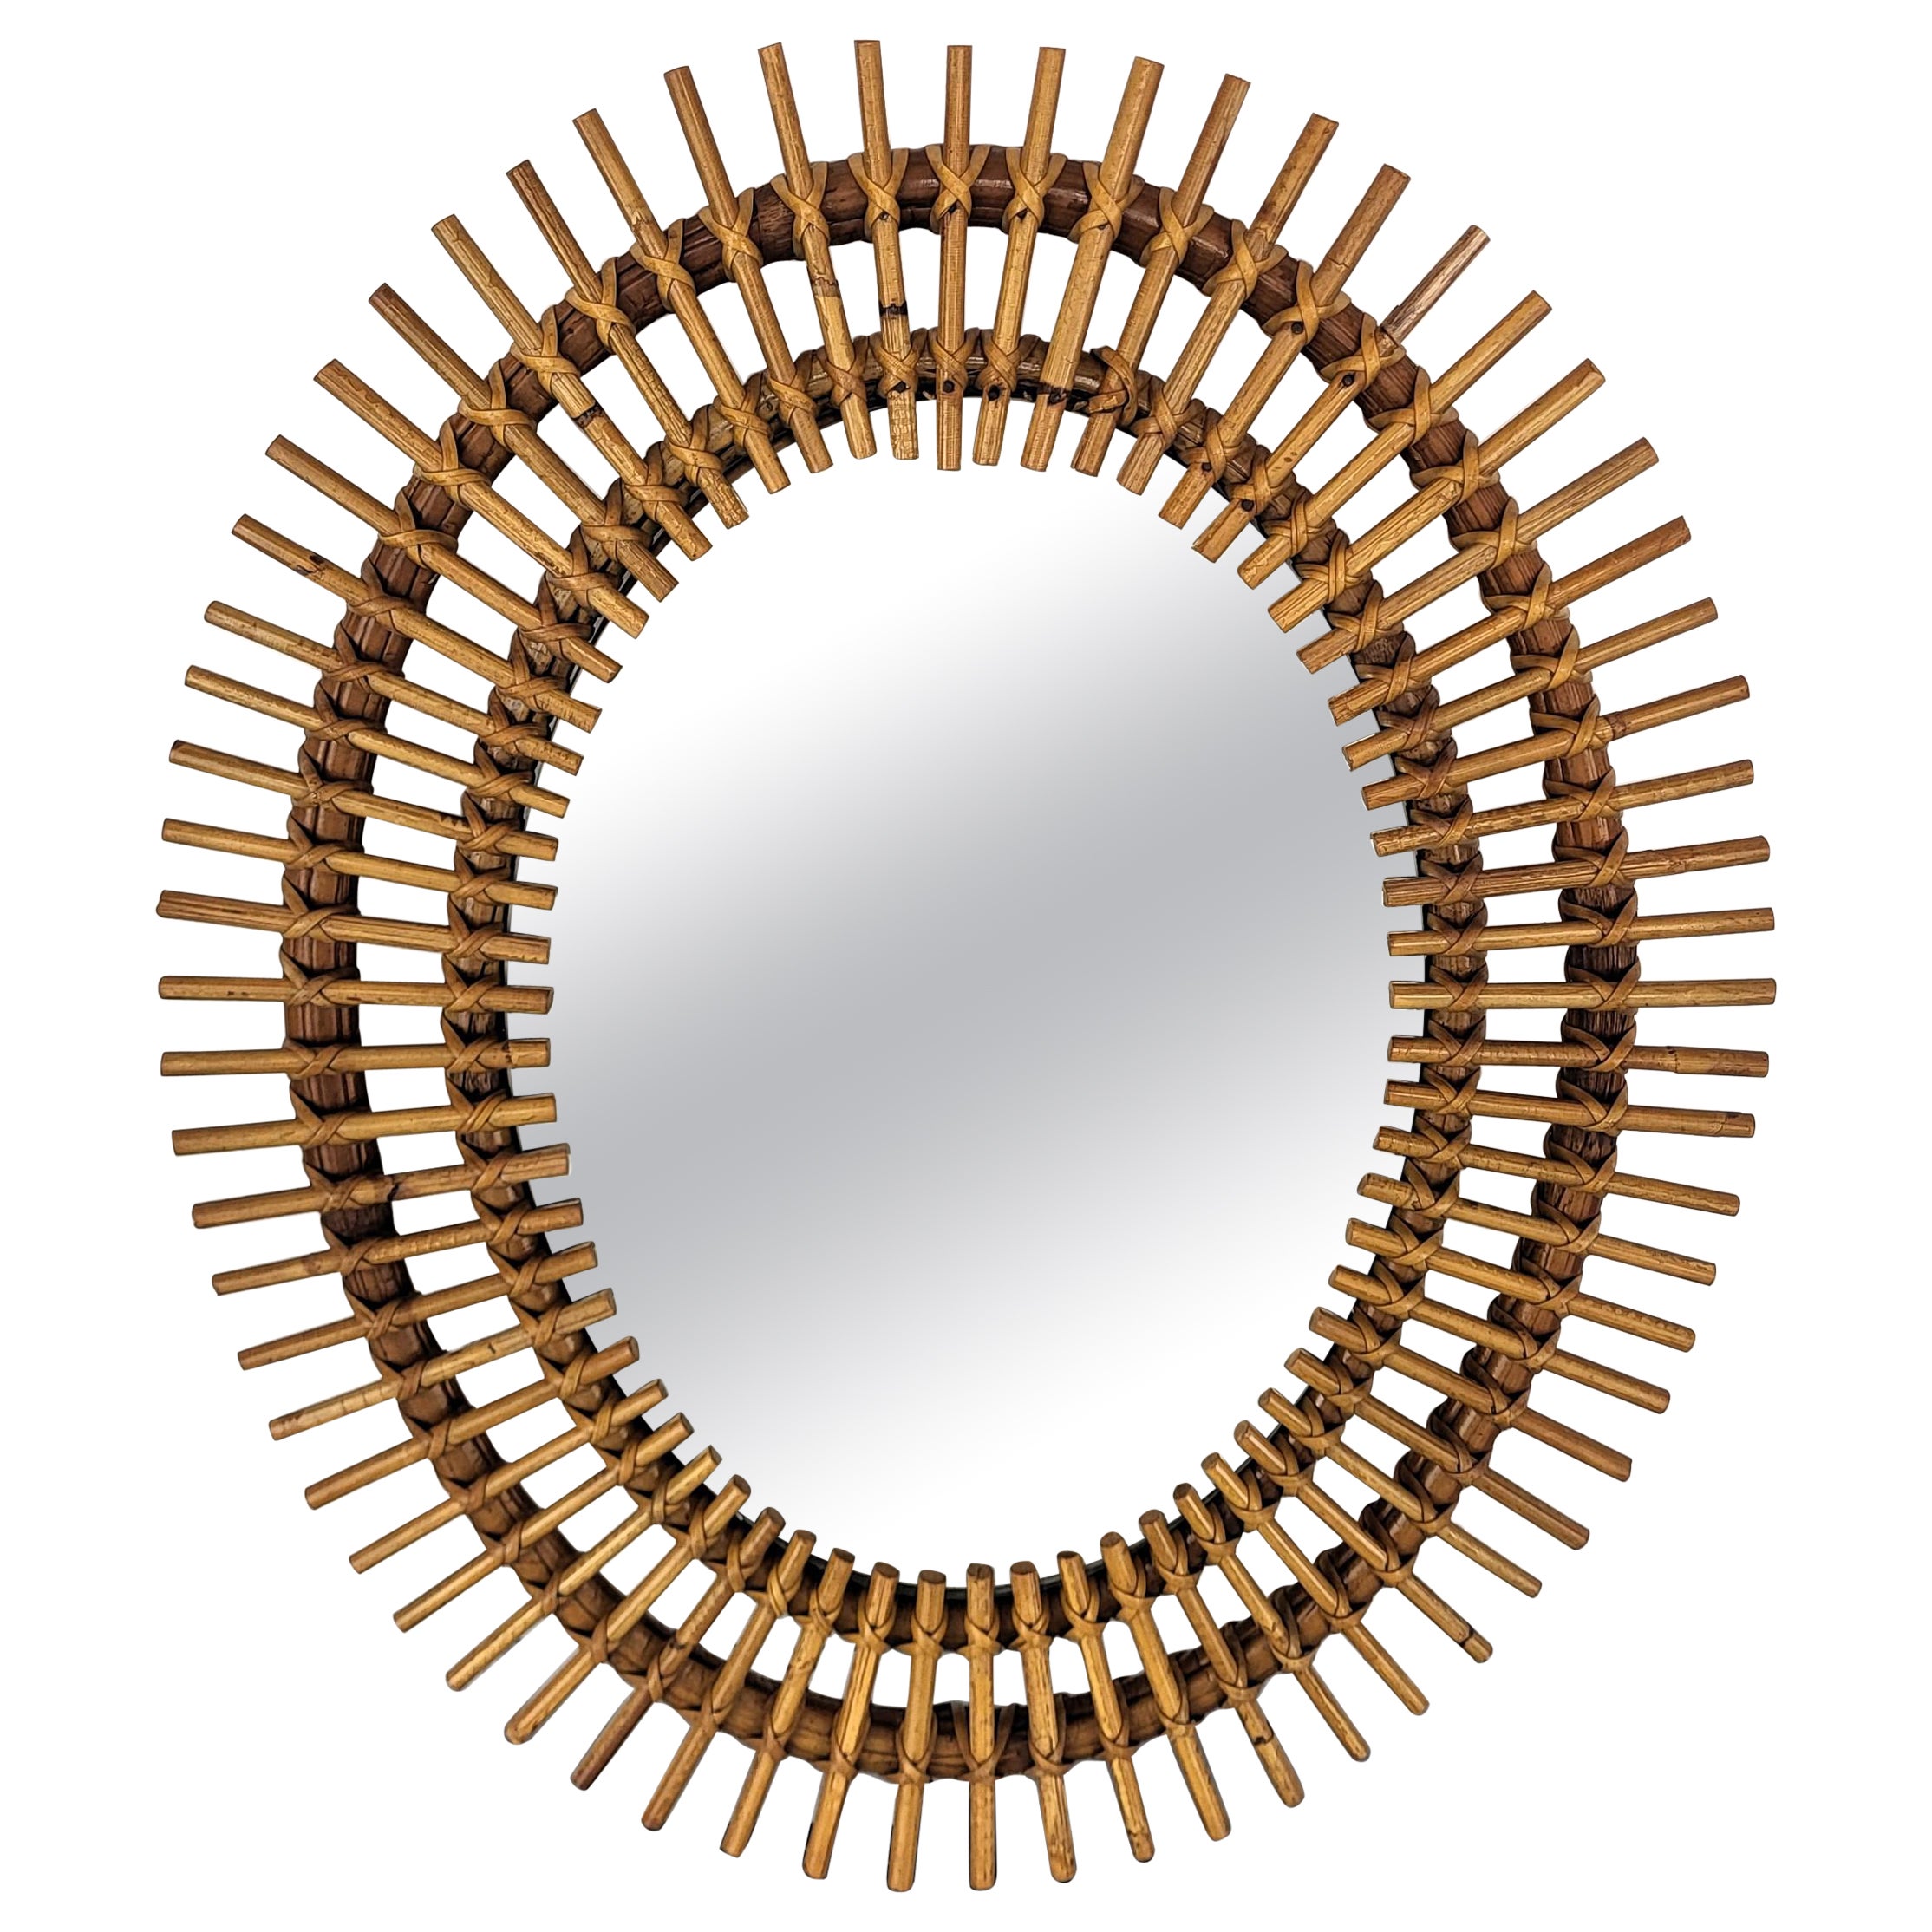 1970s Italian Bamboo Rattan Bohemian French Riviera Small Oval Wall Mirror For Sale